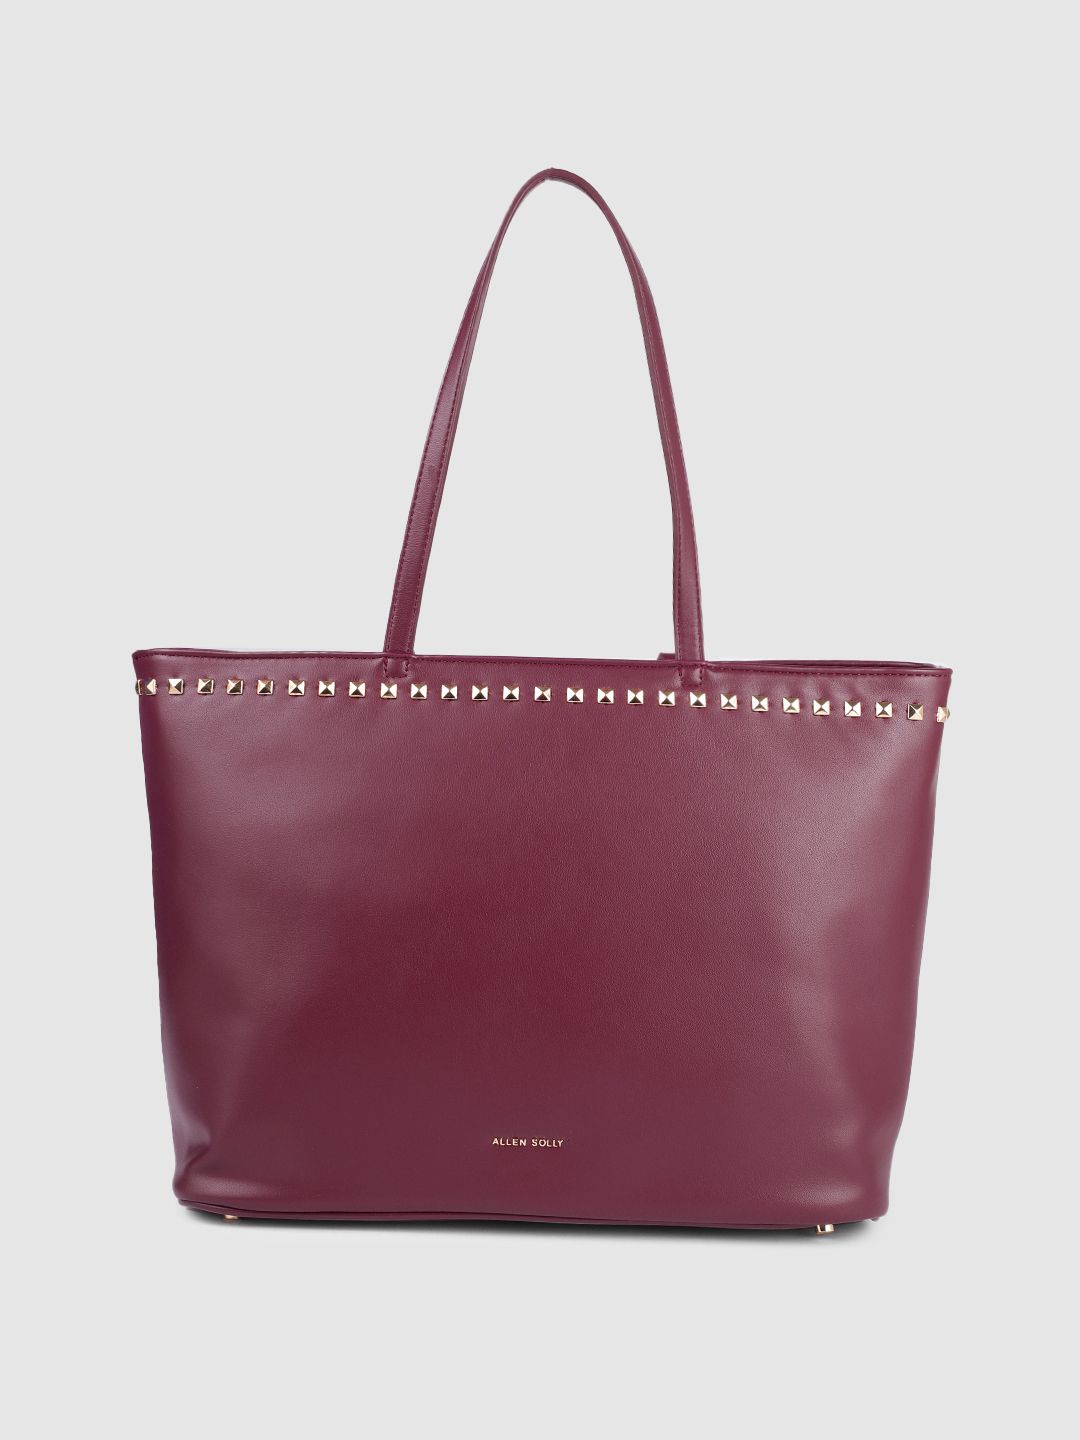 Allen Solly Maroon Solid Structured Shoulder Bag Price in India